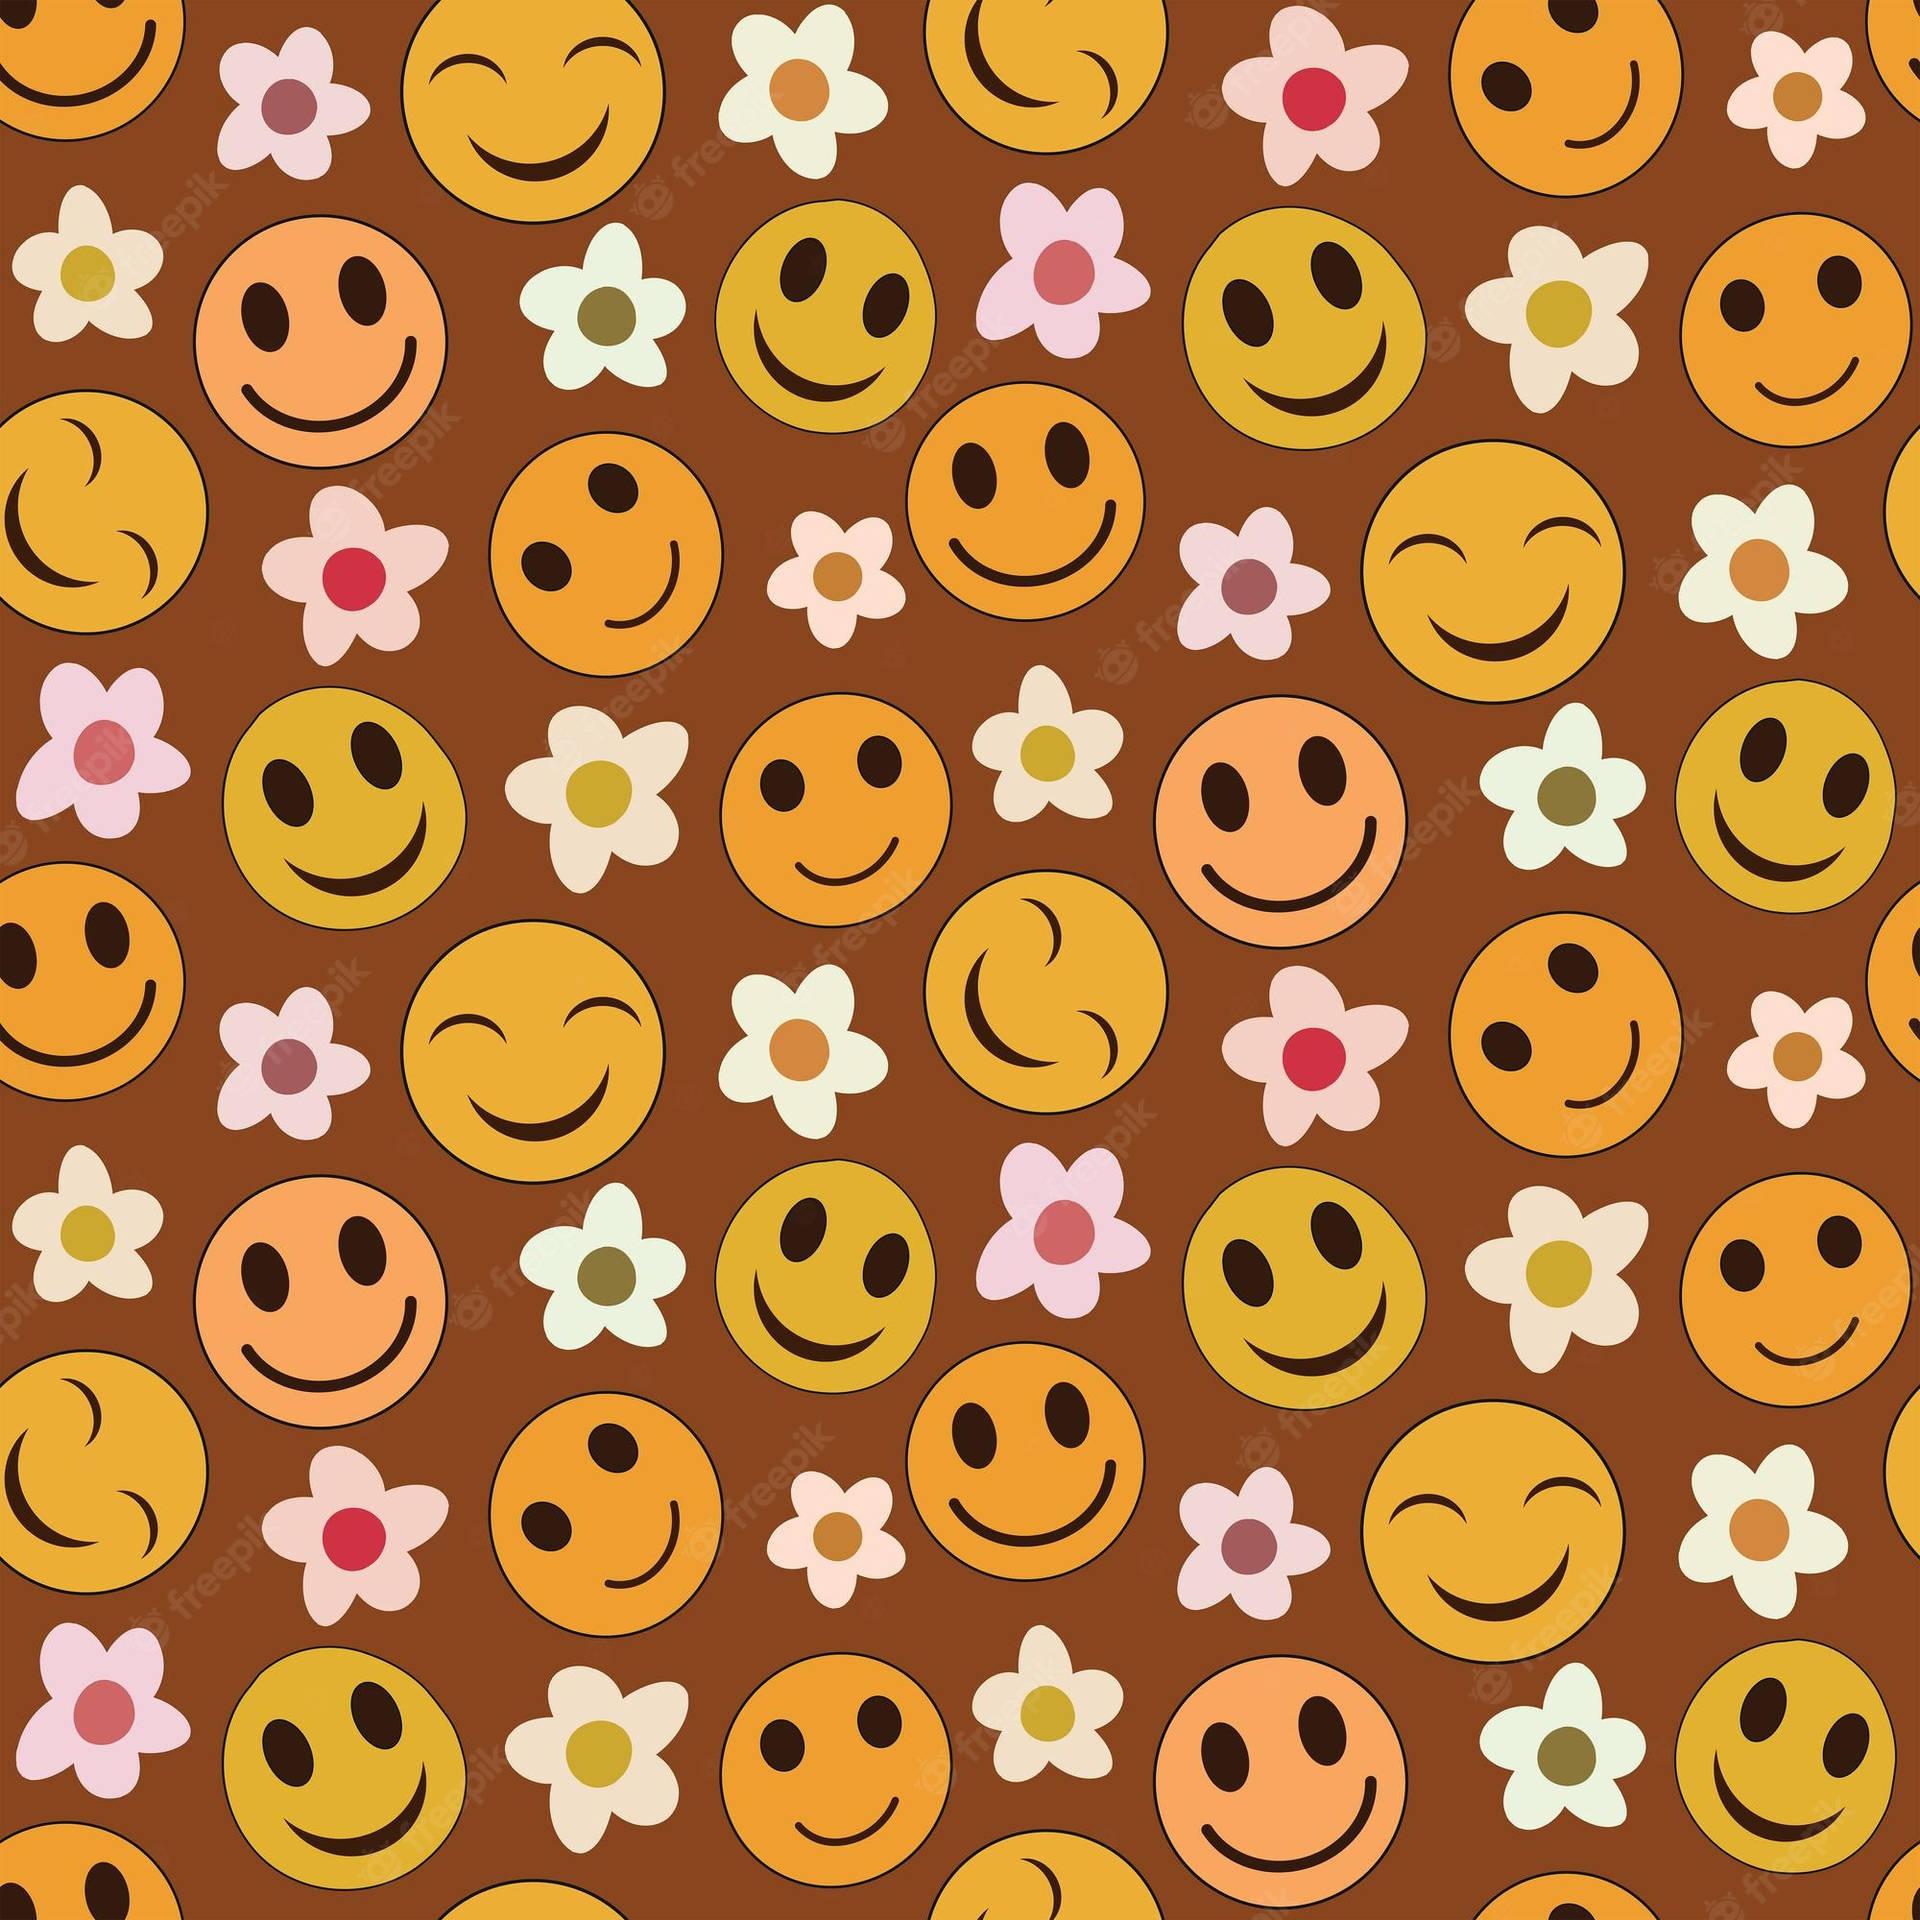 indie wallpaper smiley face design  Drip smiley face wallpaper Graphic  wallpaper Iphone wallpaper pattern